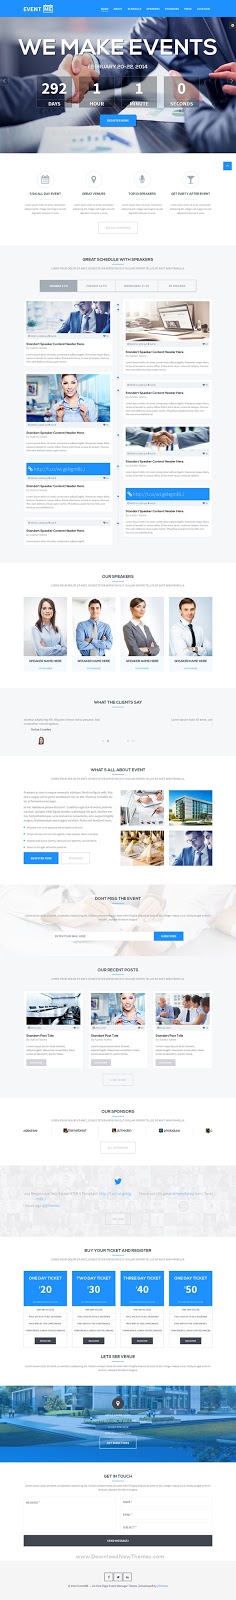 Responsive Conference Landing Page